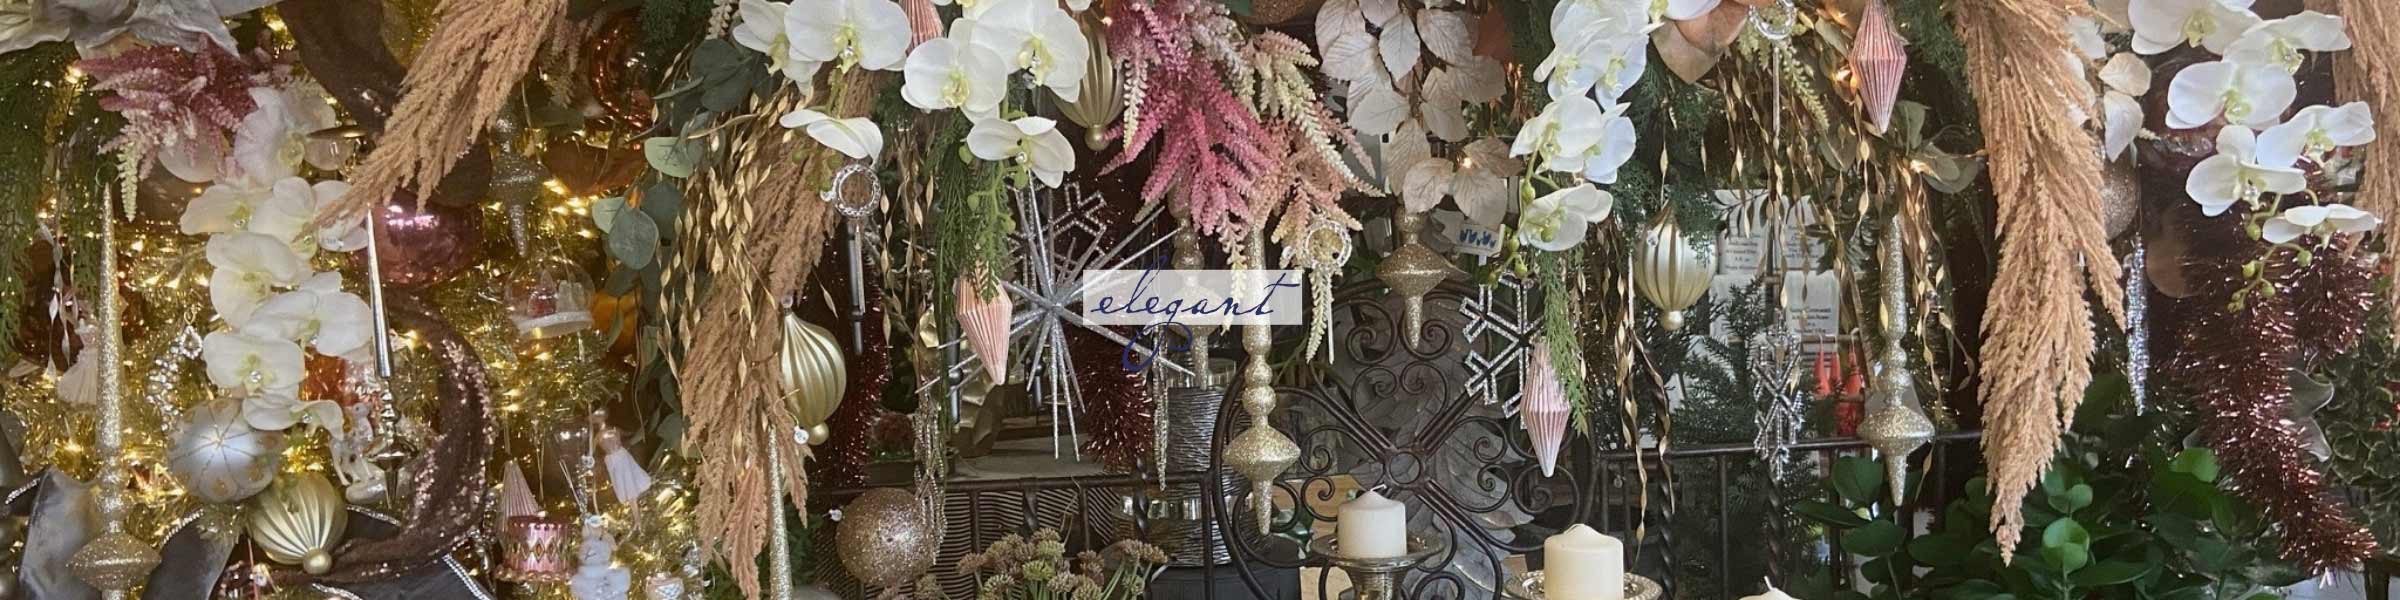 Elegant holiday gifts and decorations